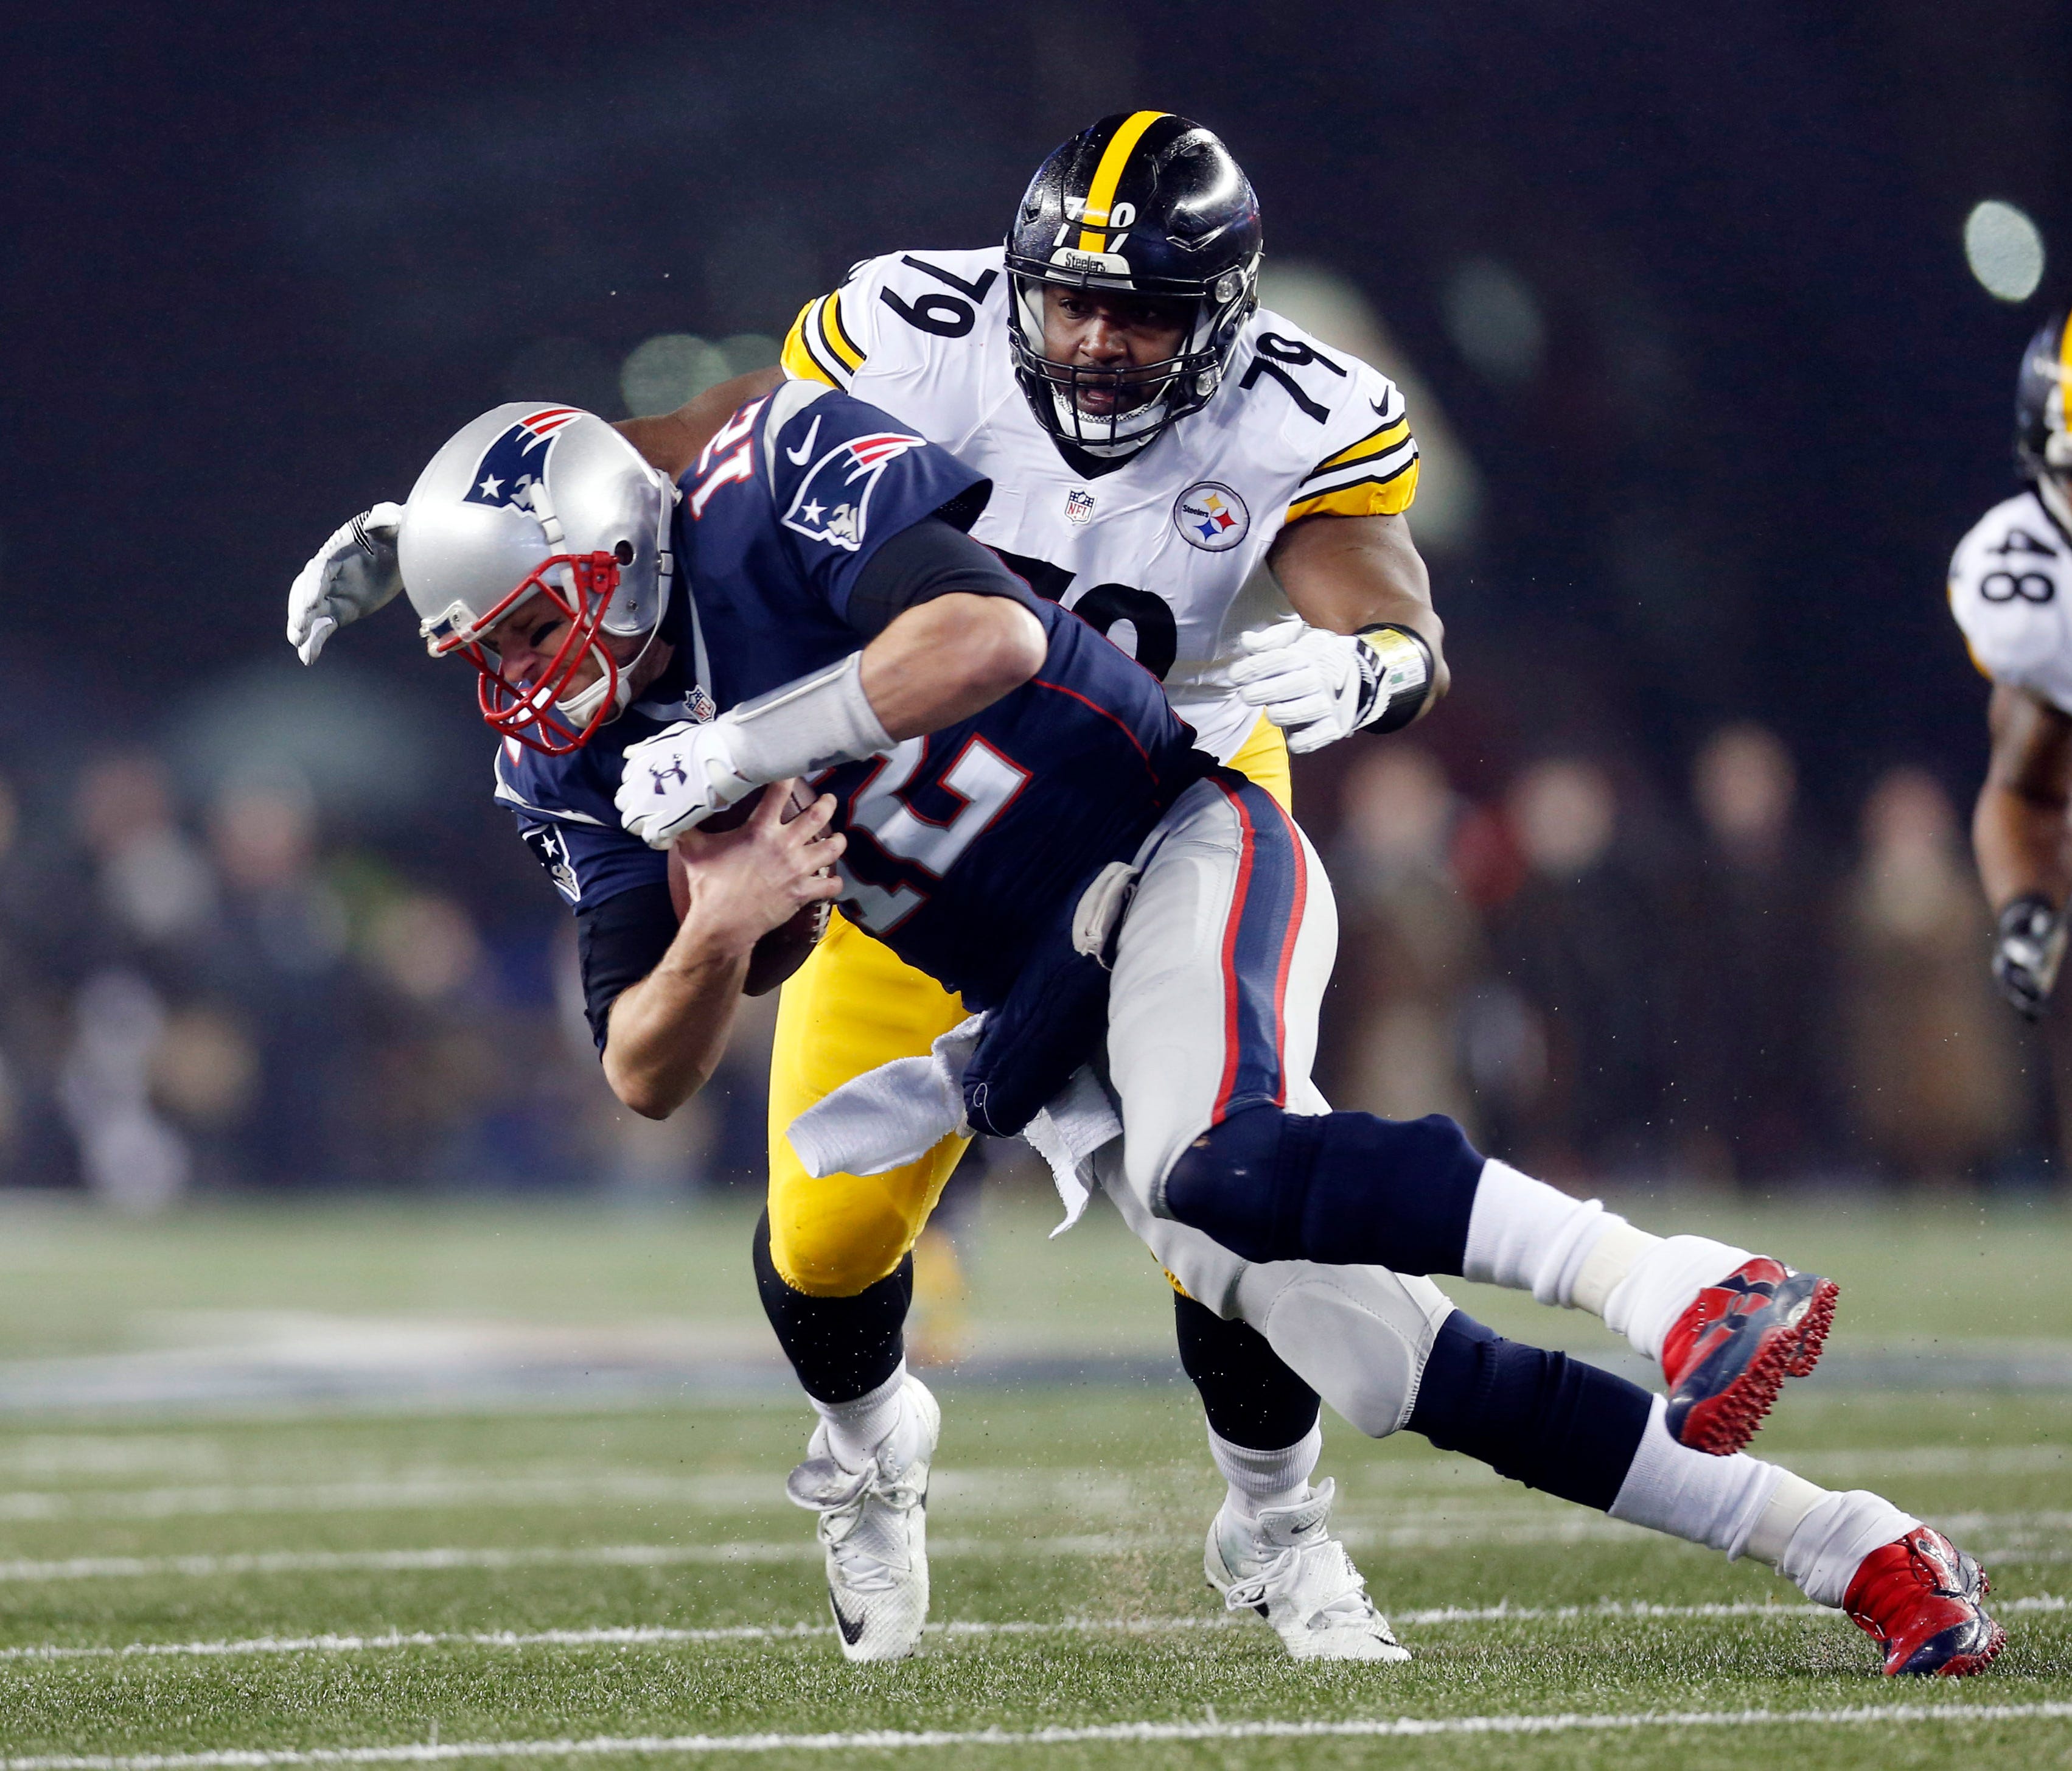 New England Patriots quarterback Tom Brady (12) is sacked by Pittsburgh Steelers nose tackle Javon Hargrave (79) in the first quarter in the 2017 AFC Championship Game at Gillette Stadium.